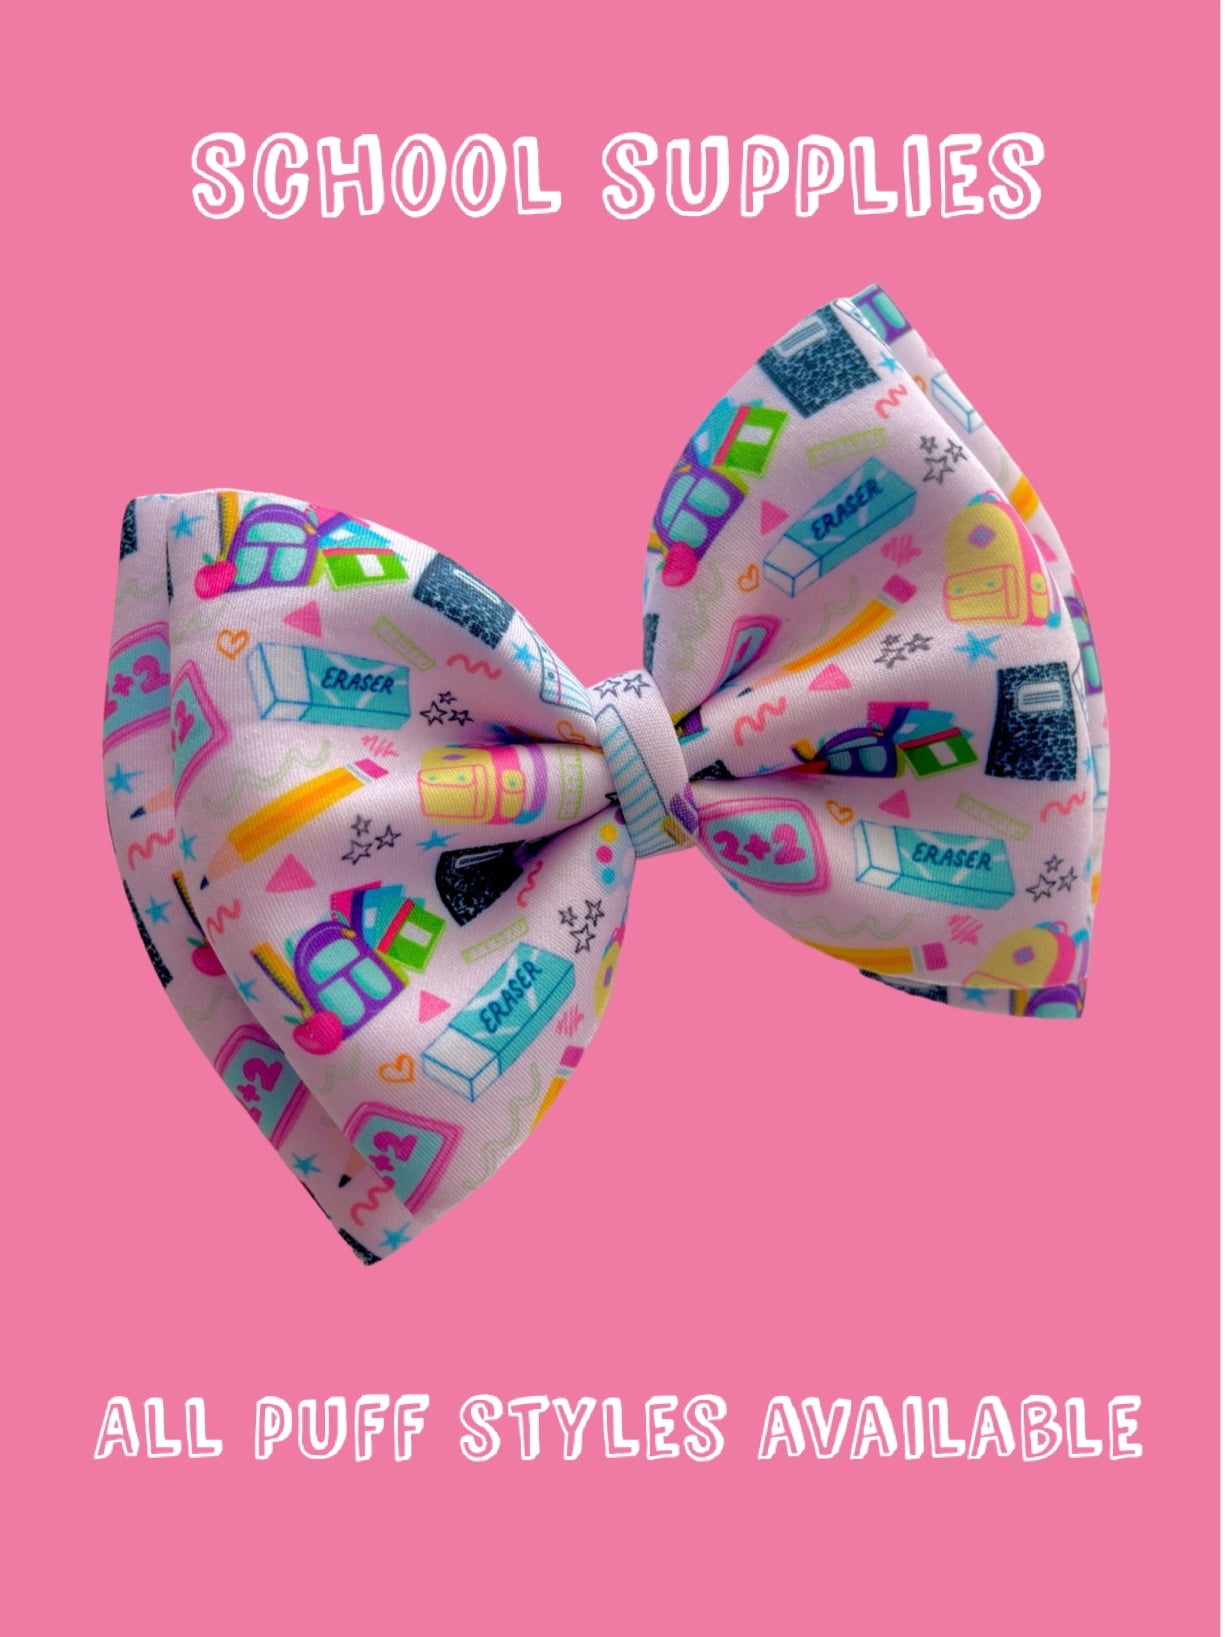 School Supplies Puffs (All Puff Styles Are Available)